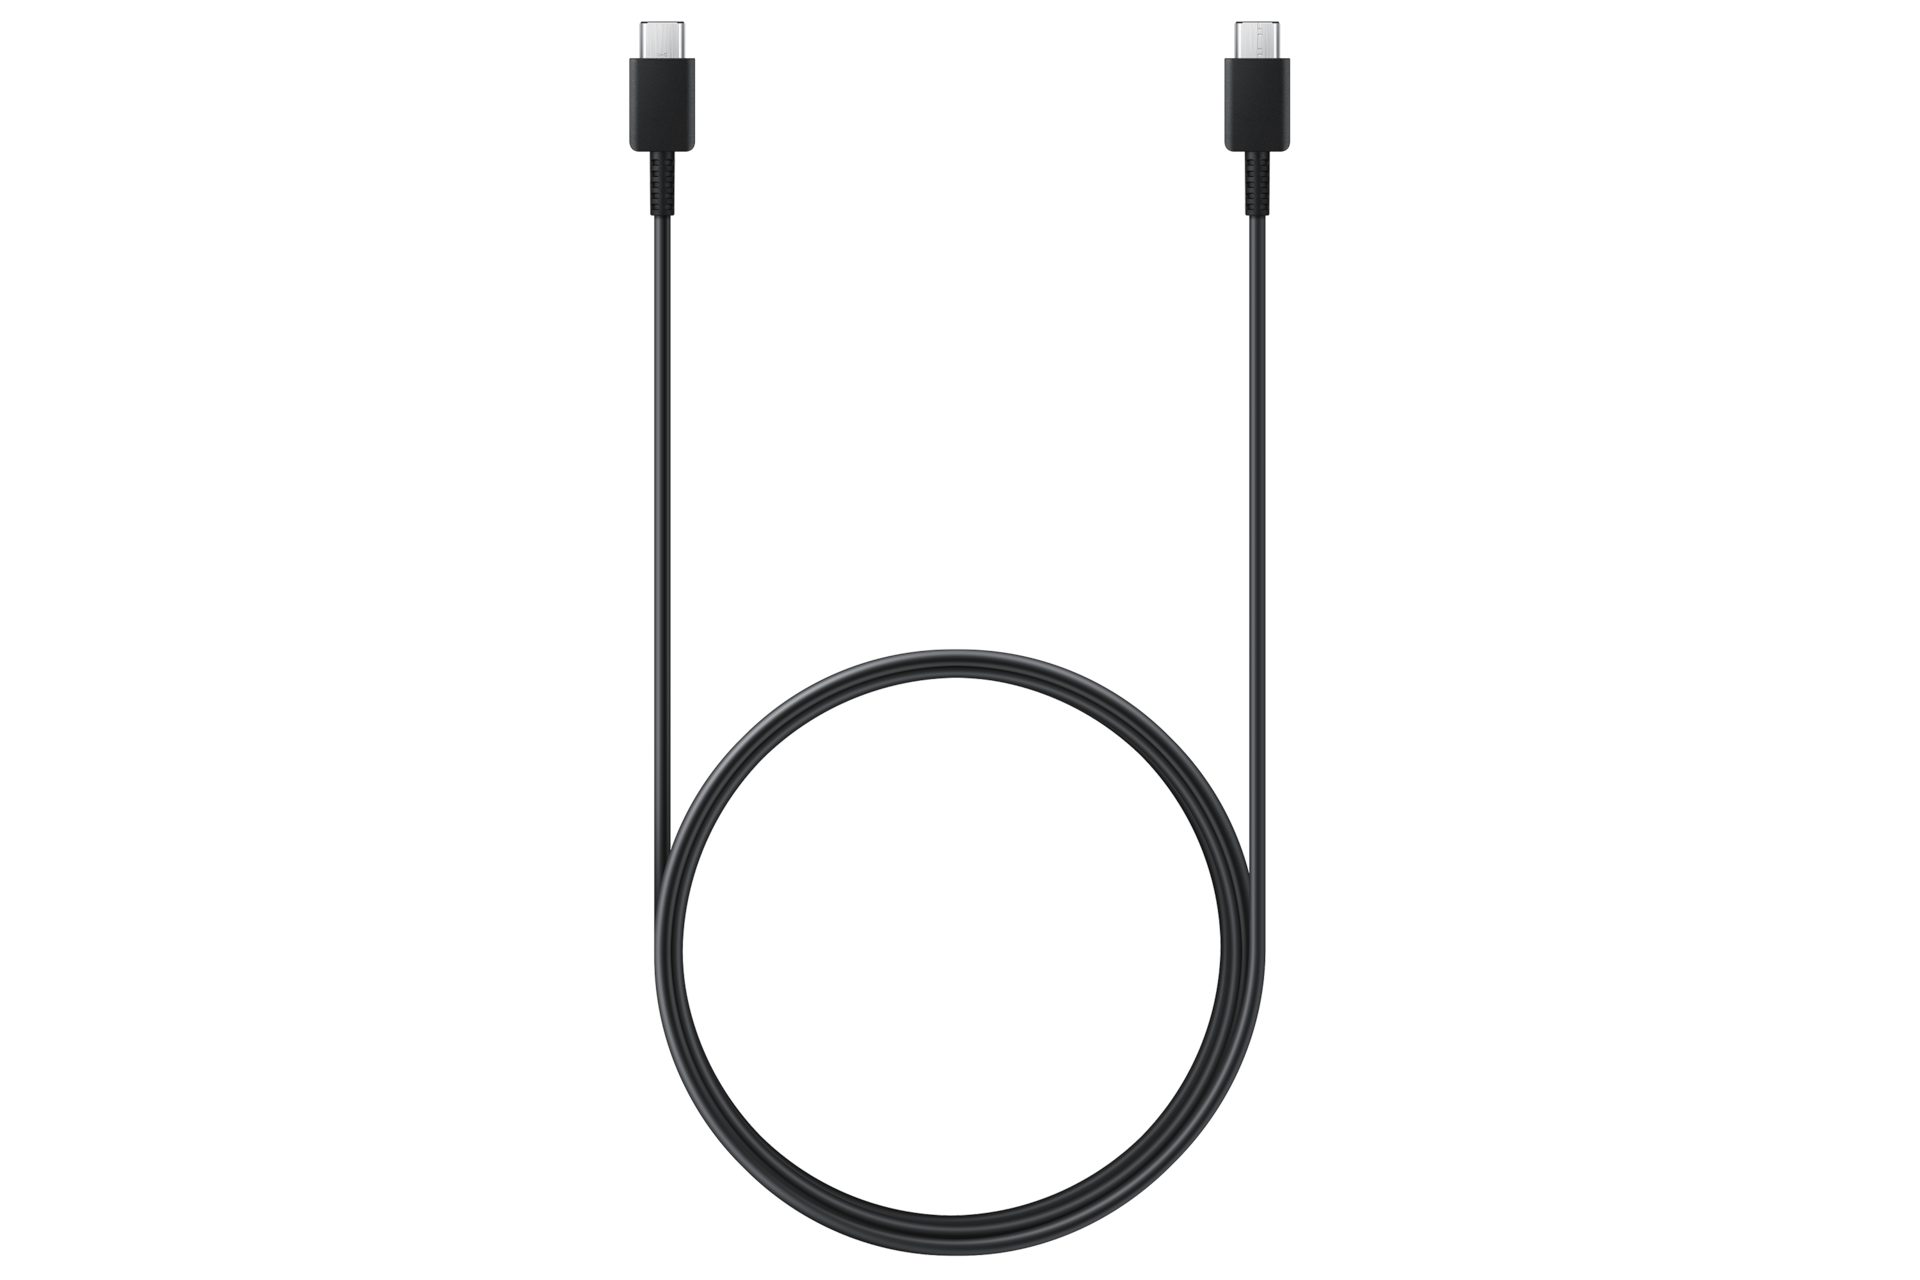 Buy USB Cable 3A (USB-C to USB-C) - Black